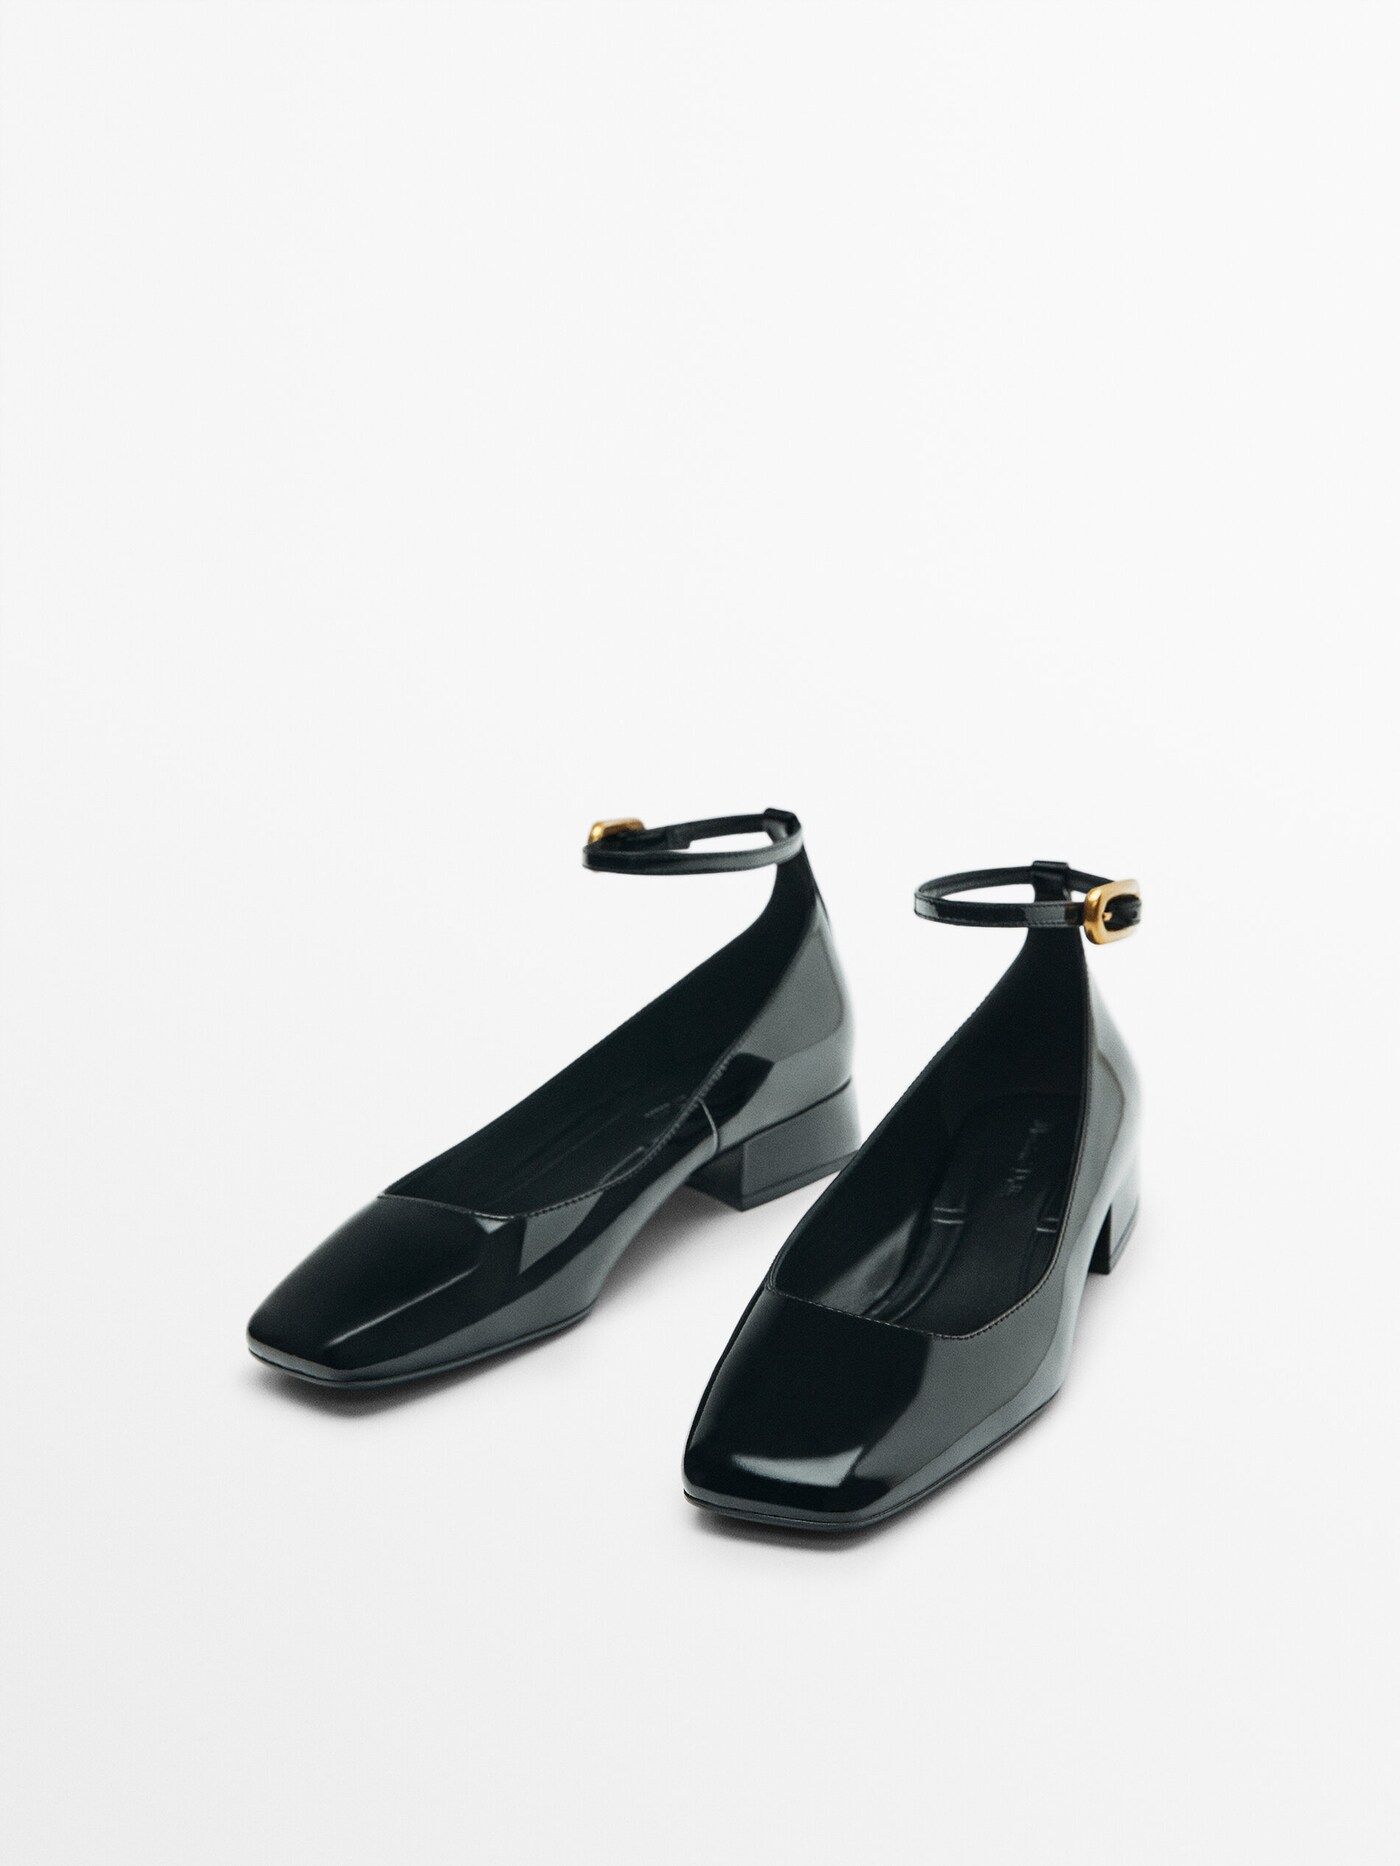 Patent finish ballerinas with buckled strap | Massimo Dutti (US)